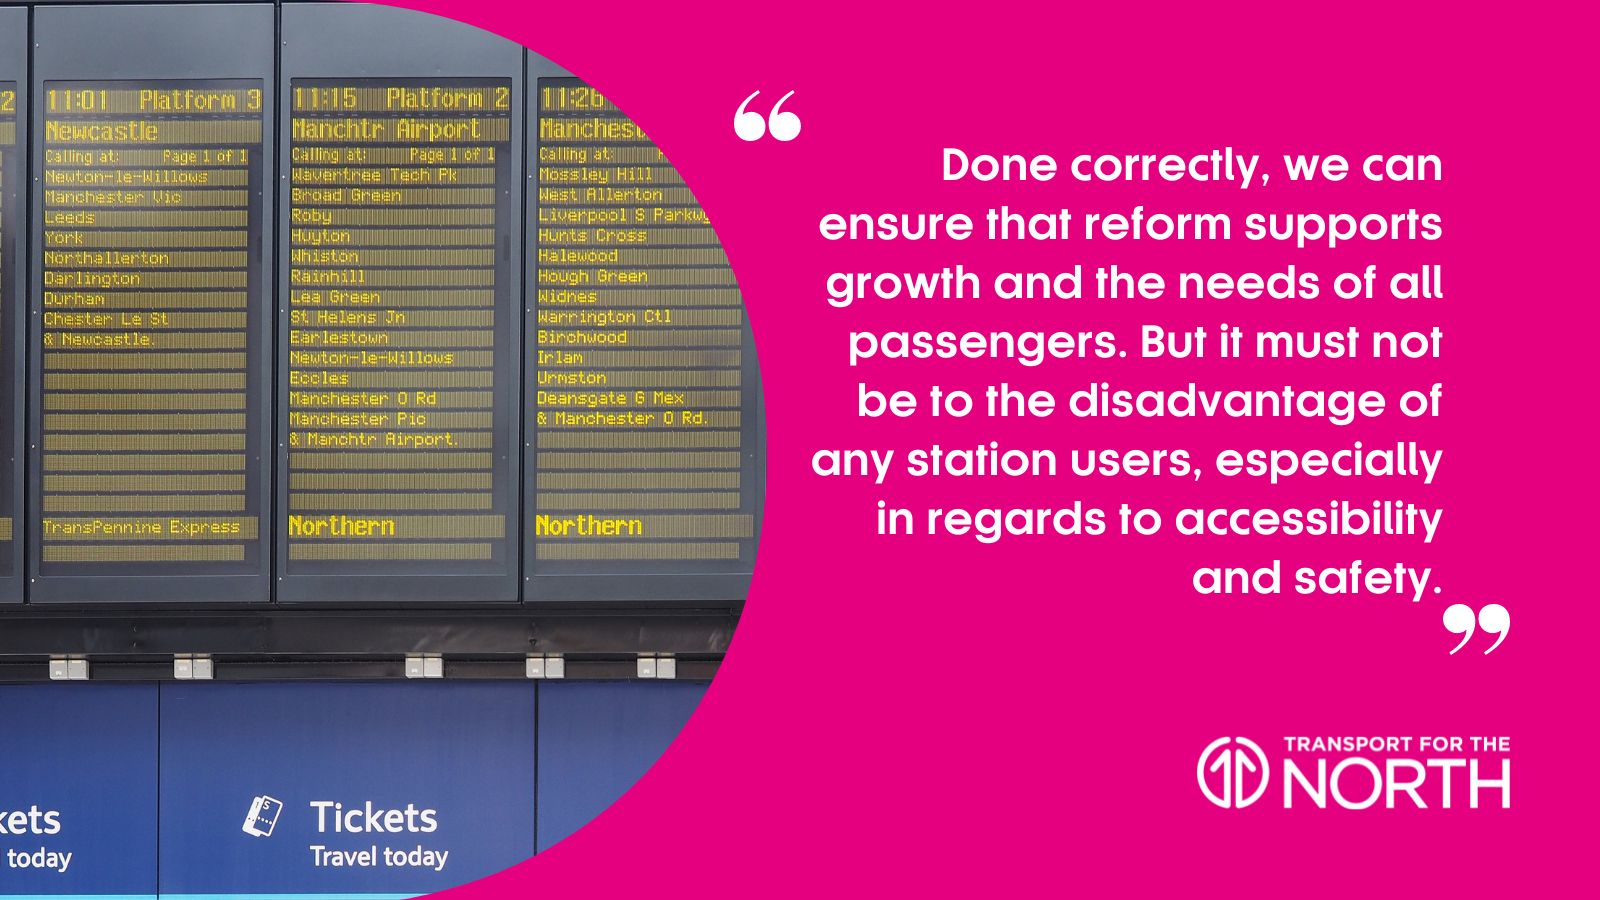 Ticket office reform response with image of train times board